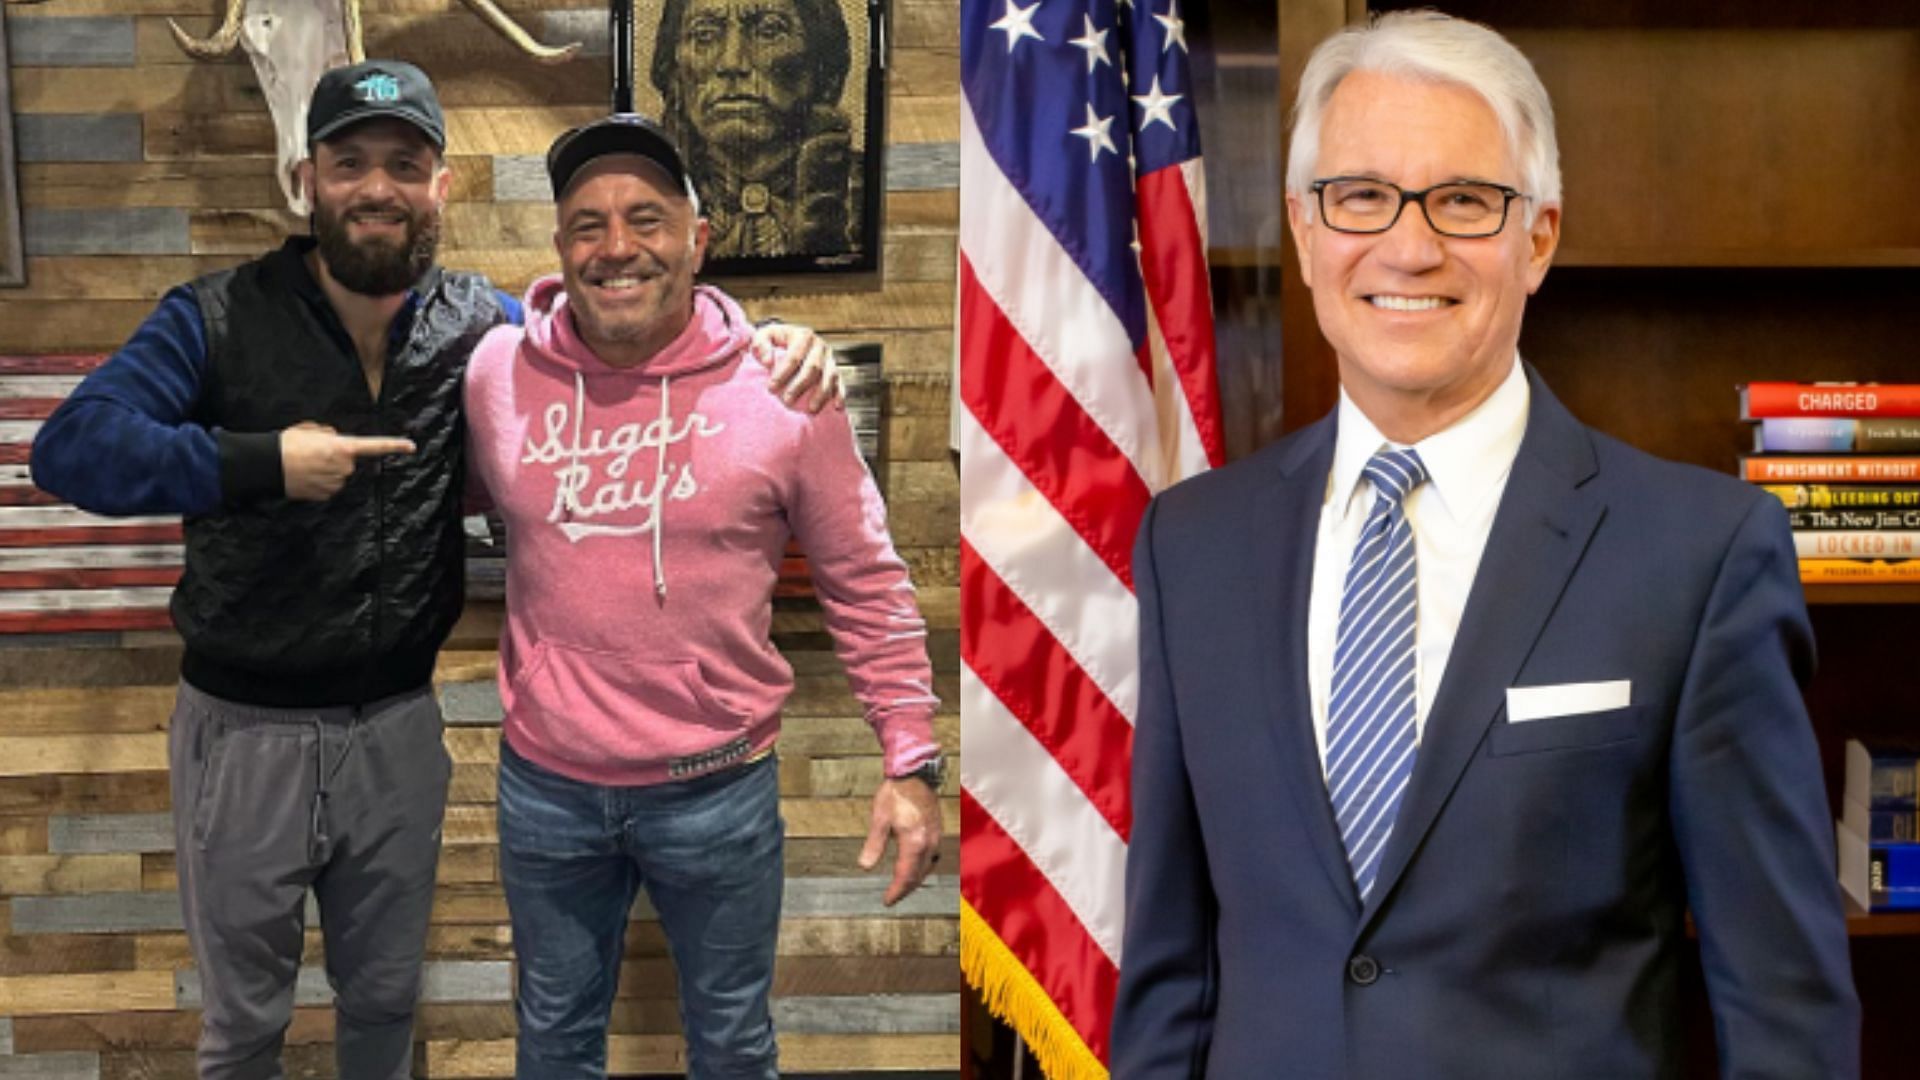 Jorge Masvidal &amp; Joe Rogan (left), District Attorney of Los Angeles County George Gasc&oacute;ne (right) [Image courtesy of Government of California]